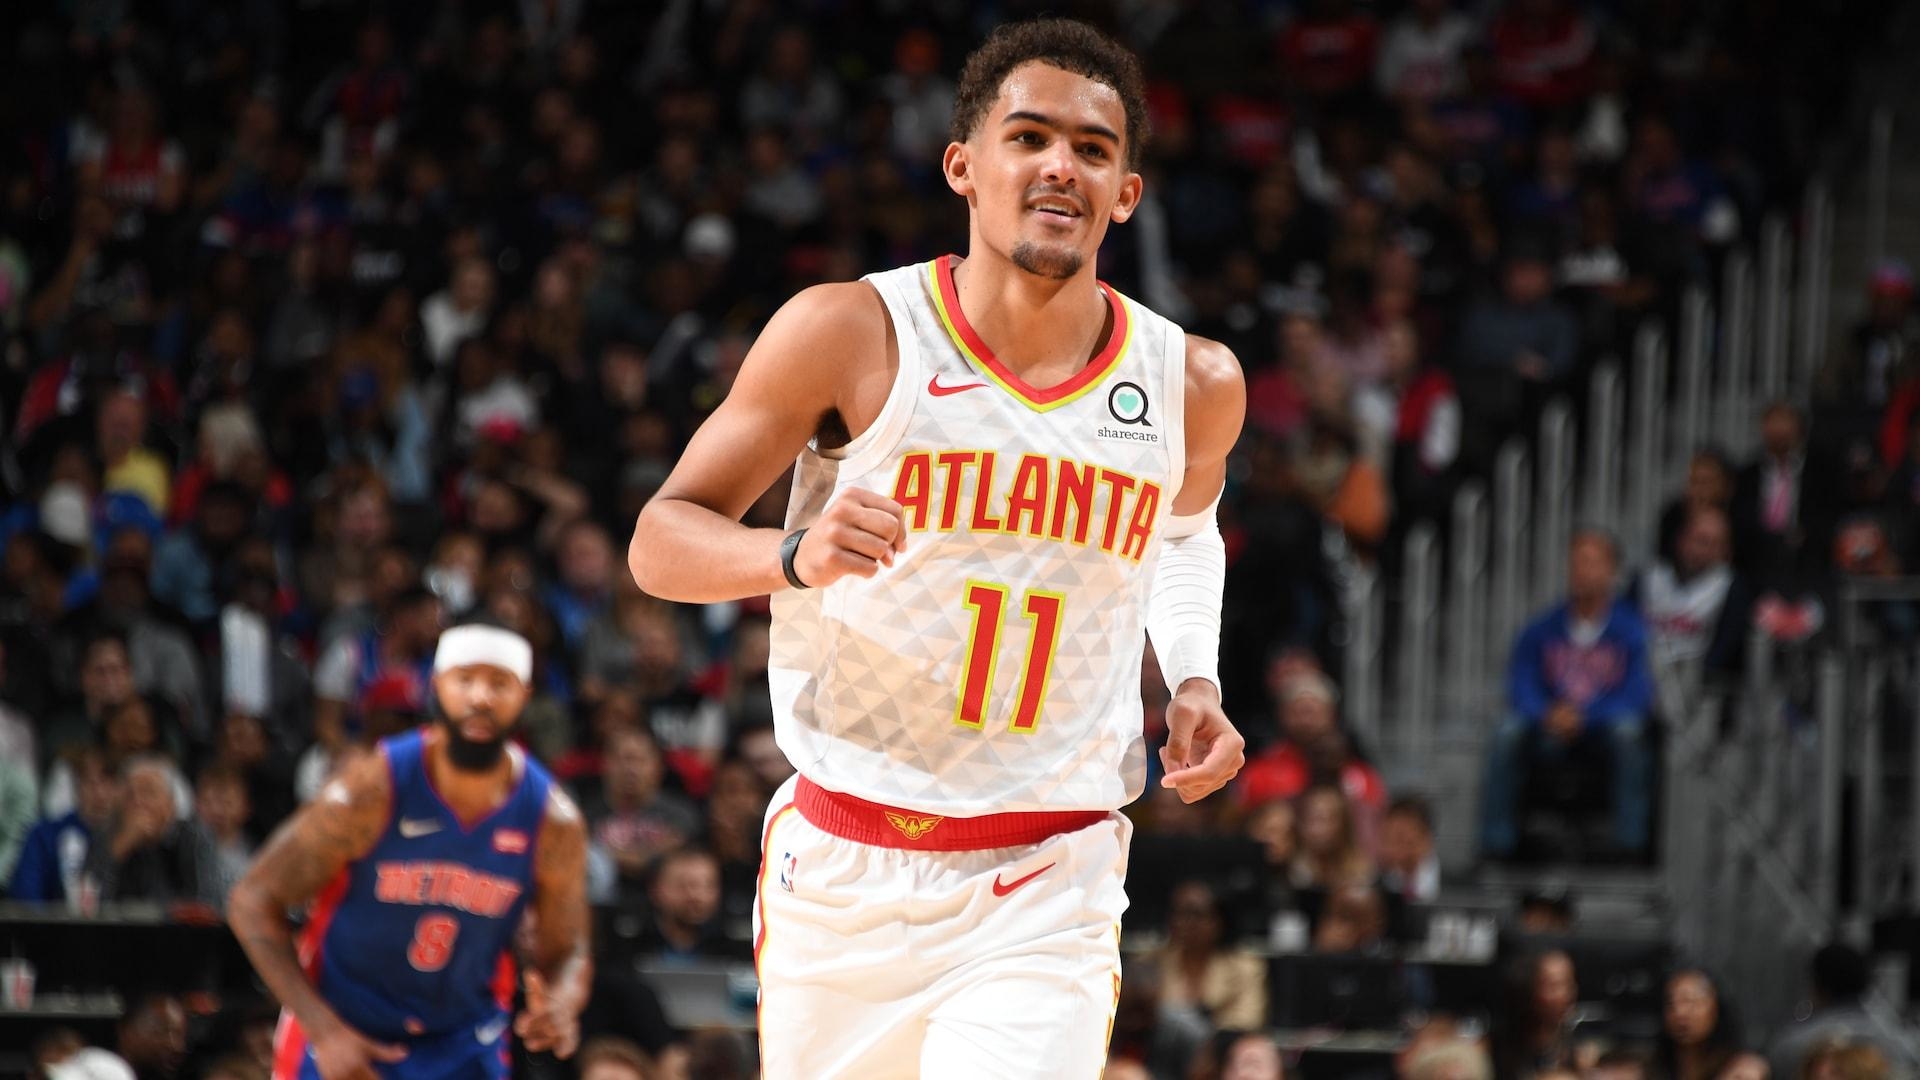 Trae Young so smoooooooooooth What player would you like to see next  Comment below       atl atlanta atlantahawks hawks traeyoung  nba  By PXLUR  Live Wallpapers  Facebook